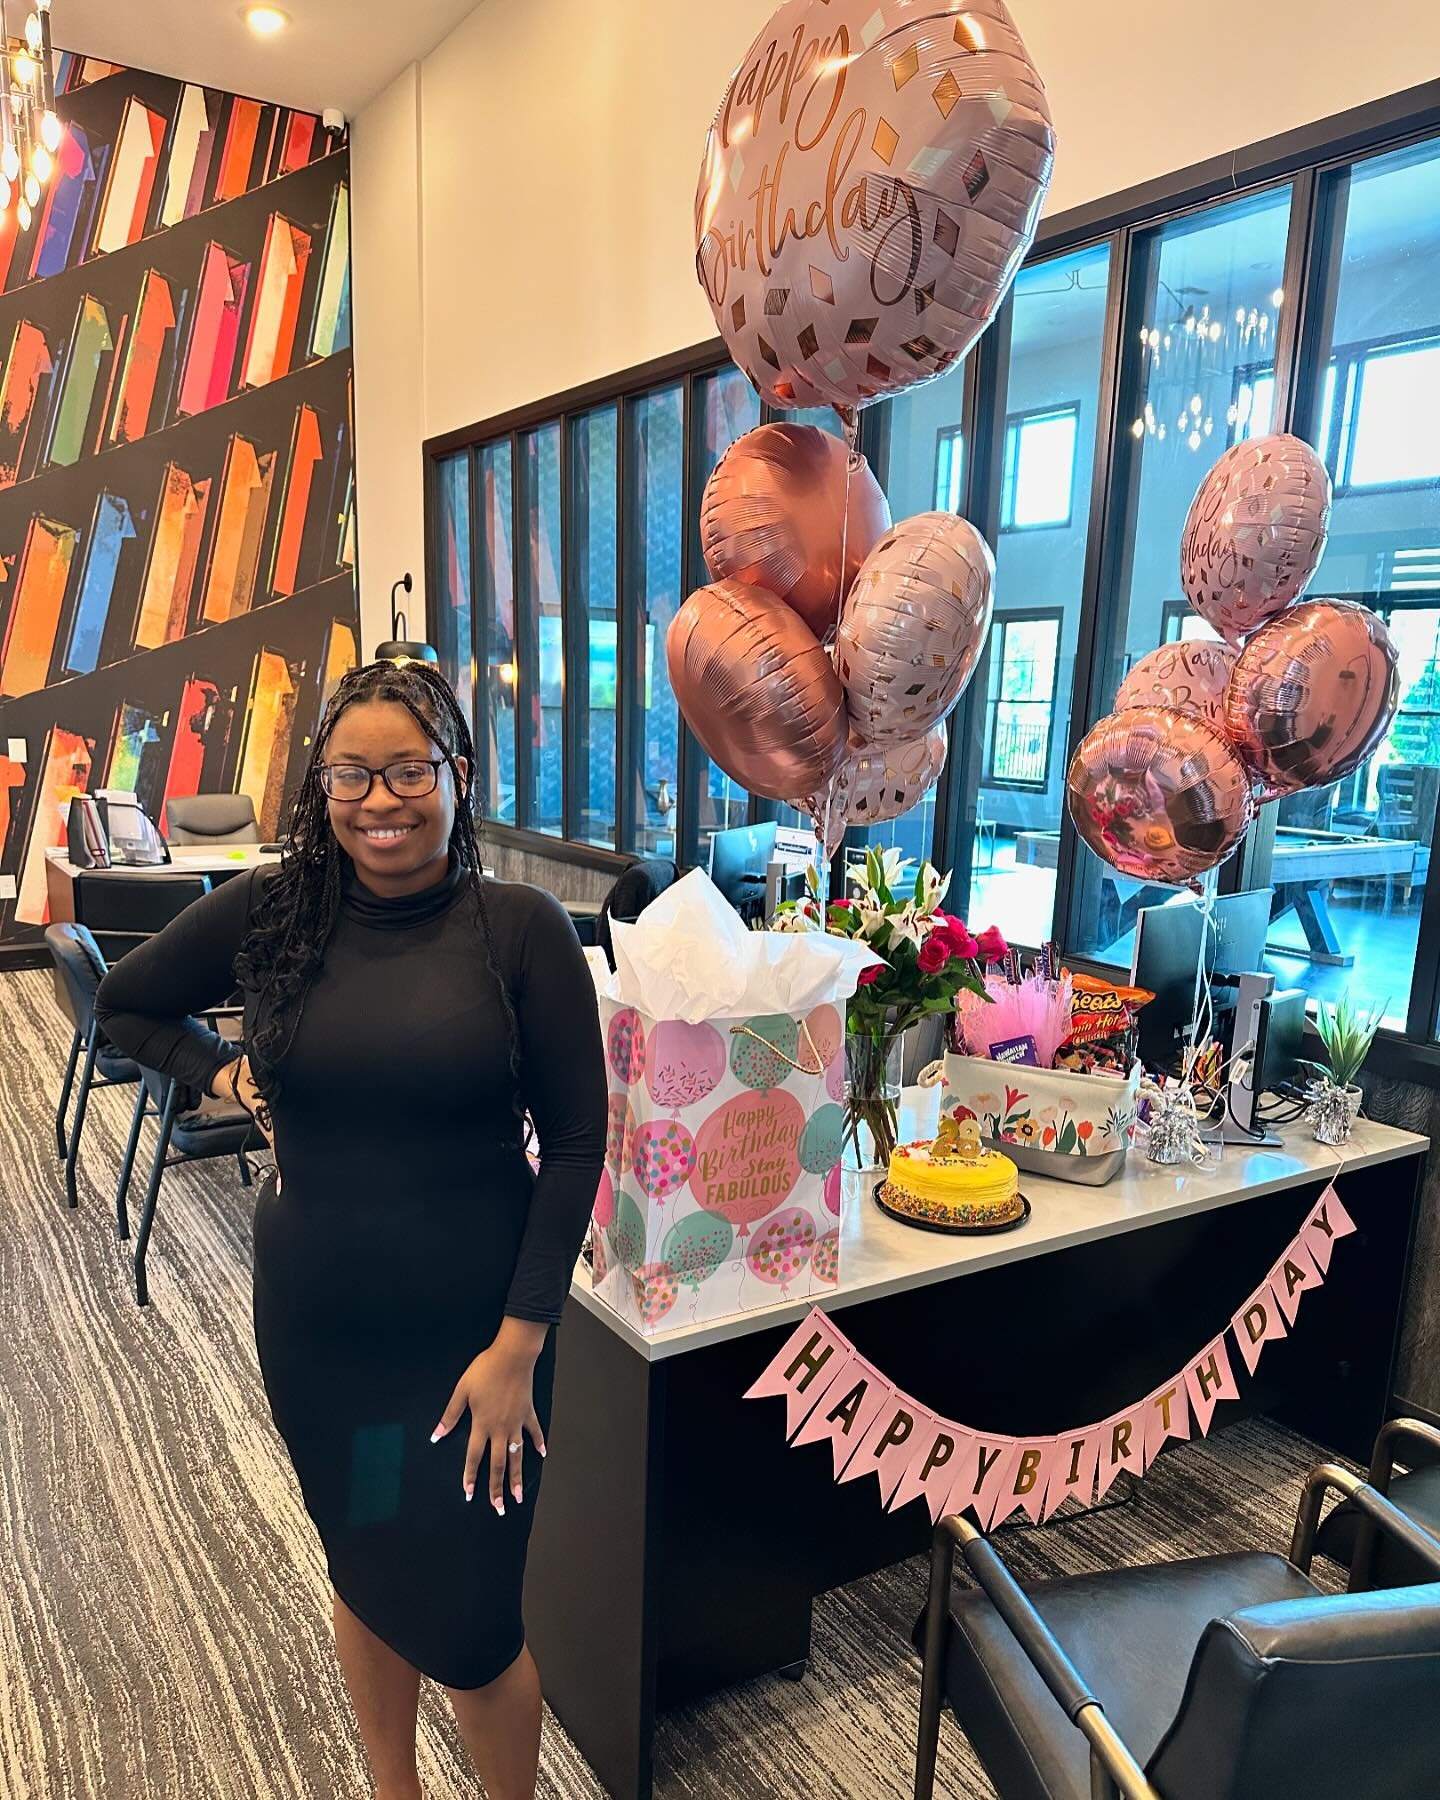 Wishing our Leasing Consultant Imani a very happy birthday!! 🎈🎂🎊 If you happen to be out and about, stop by the office and say hello!